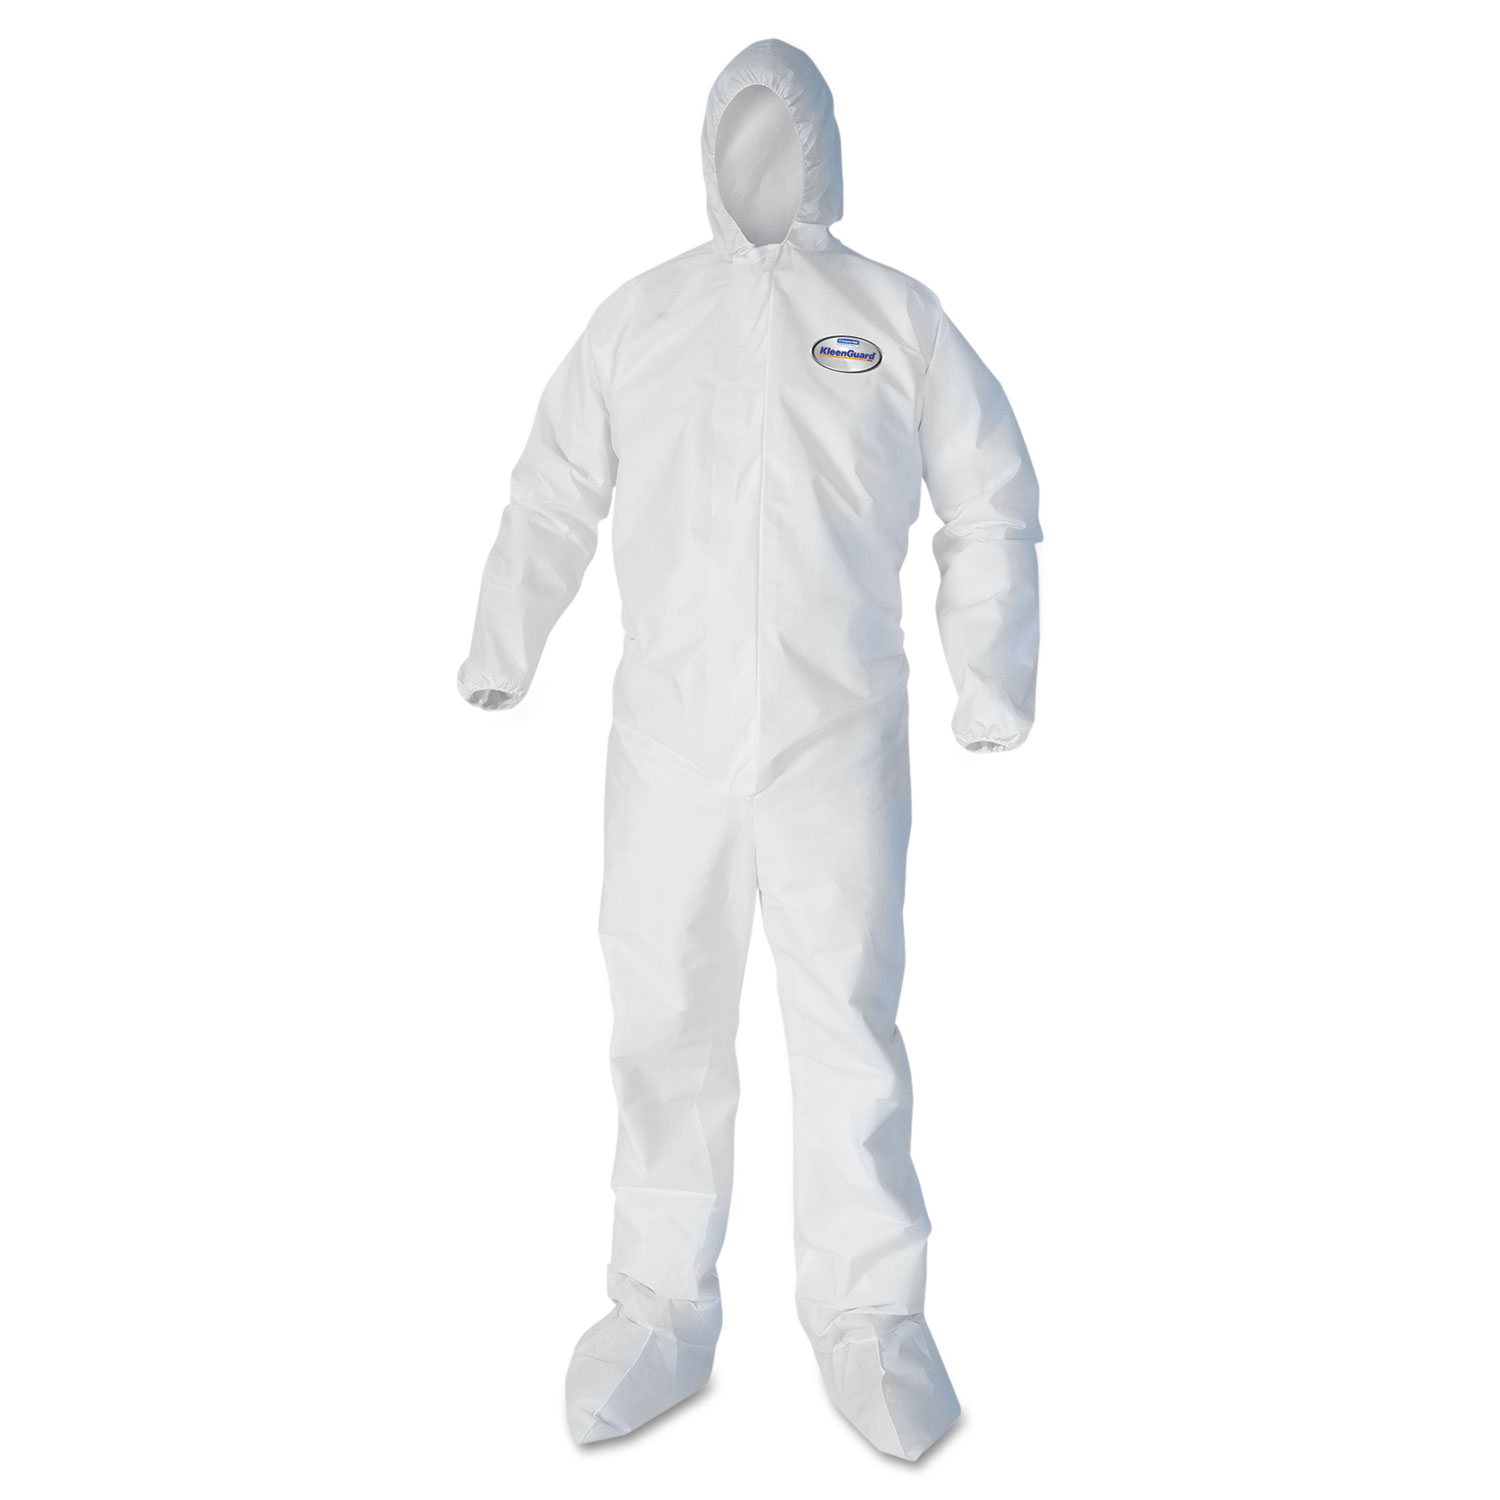 A30 Elastic Back and Cuff Hooded/Boots Coveralls, White, 3XL,21/Ct